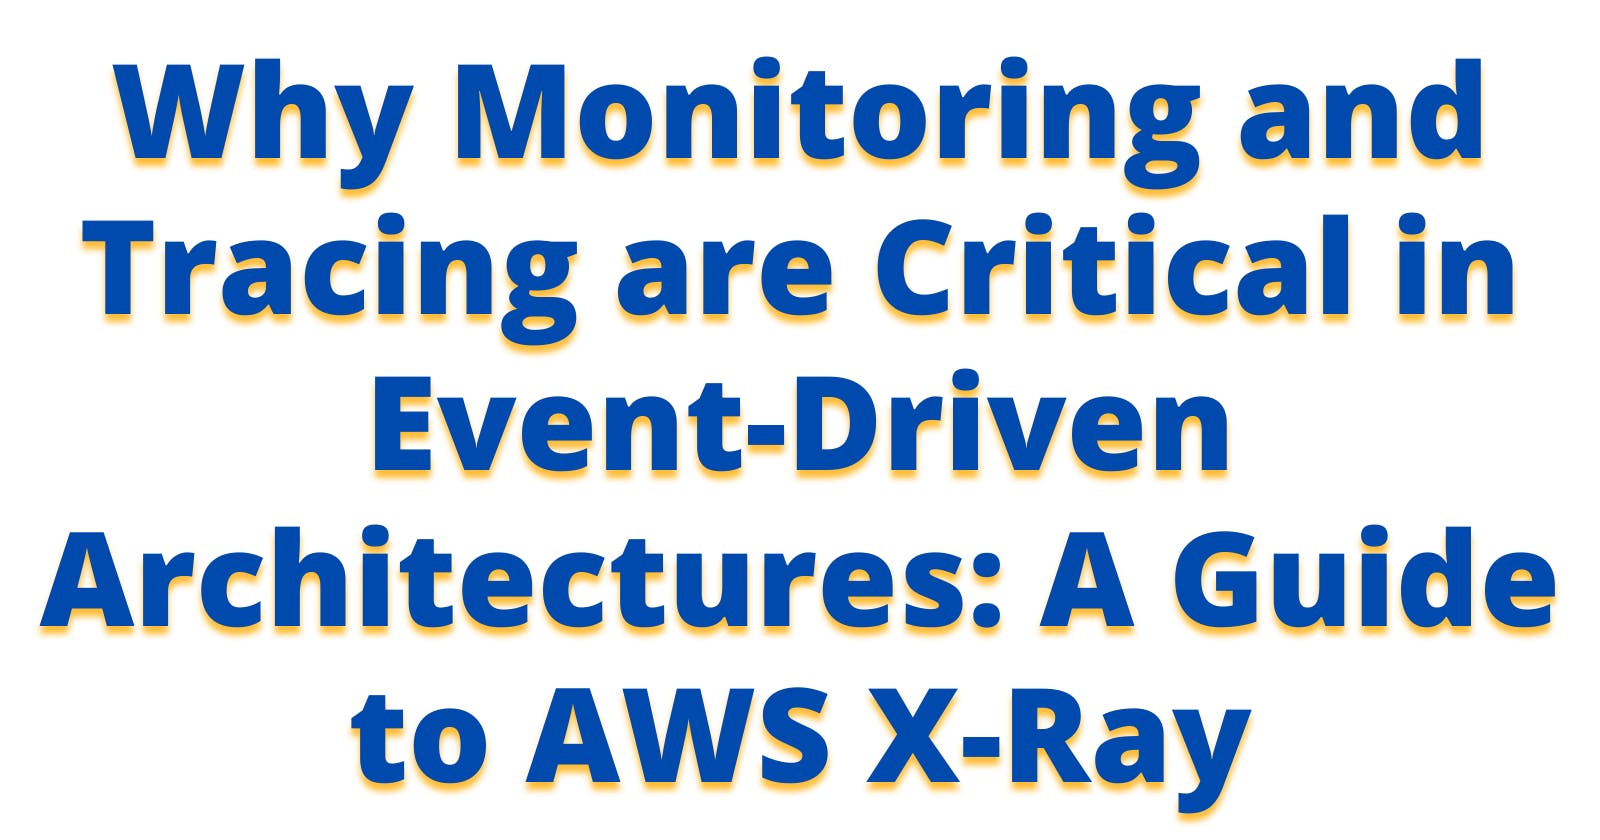 Why Monitoring and Tracing are Critical in Event-Driven Architectures: A Guide to AWS X-Ray